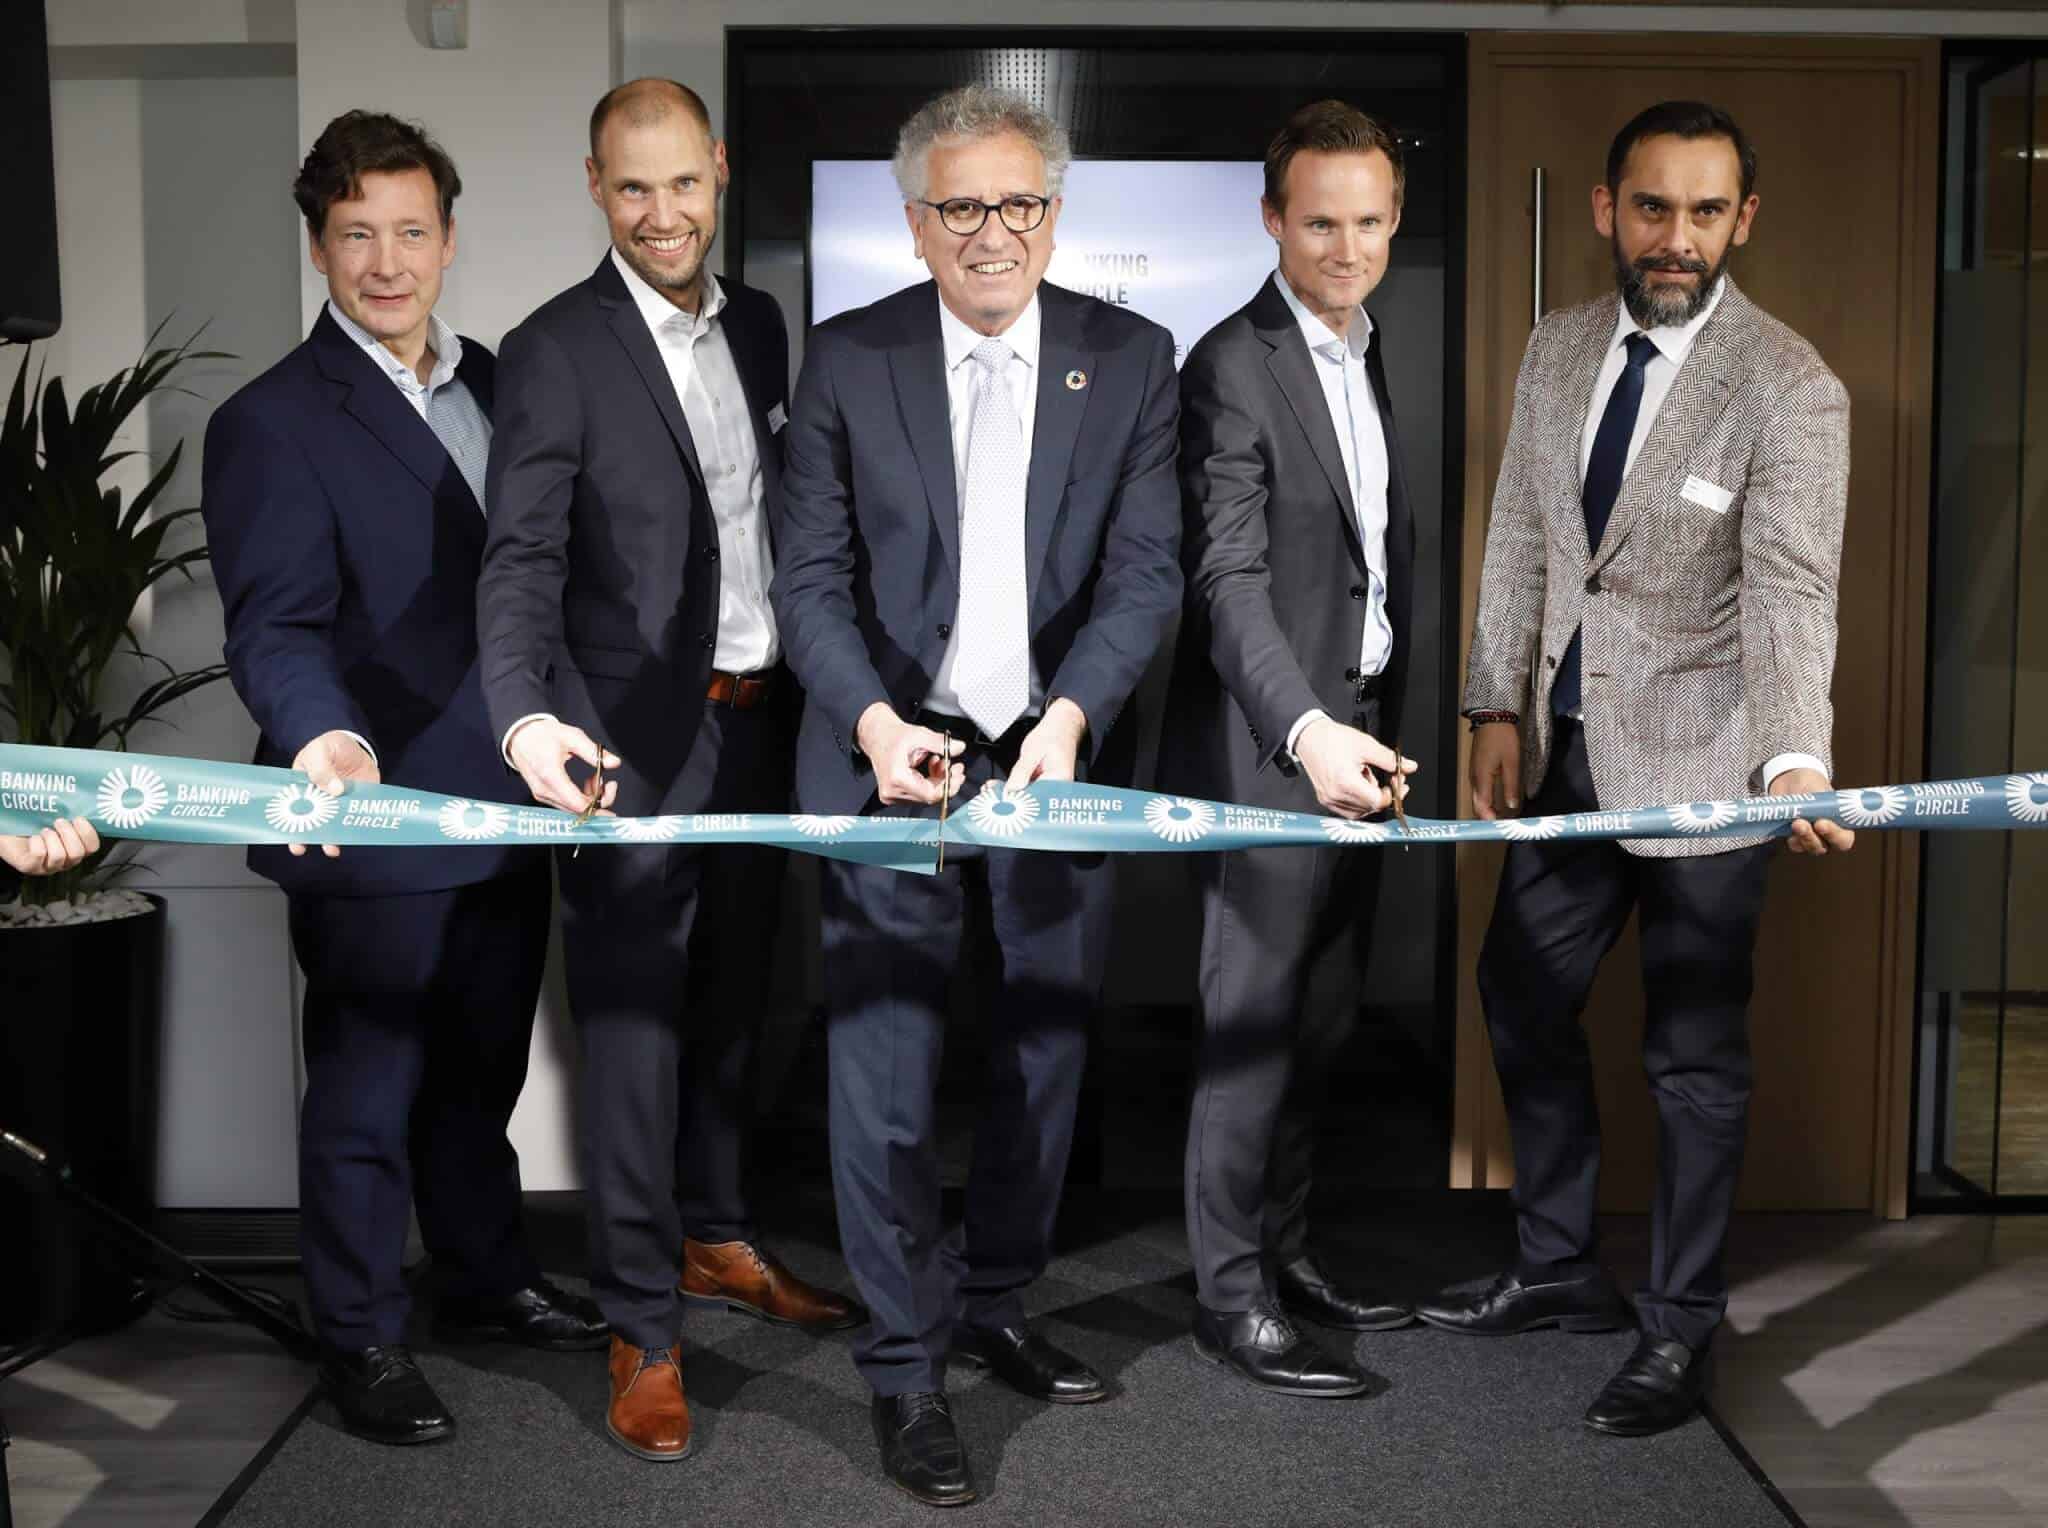 From left to right: Nicolas Mackel (CEO, LFF), Laust Bertelsen (CEO, Banking Circle), Finance Minister Pierre Gramegna, Anders la Cour (CEO, Banking Circle) and Nasir Zubairi (CEO, LhoFT) inaugurating the new Luxembourg headquarters of Banking Circle. Source: Banking Circle